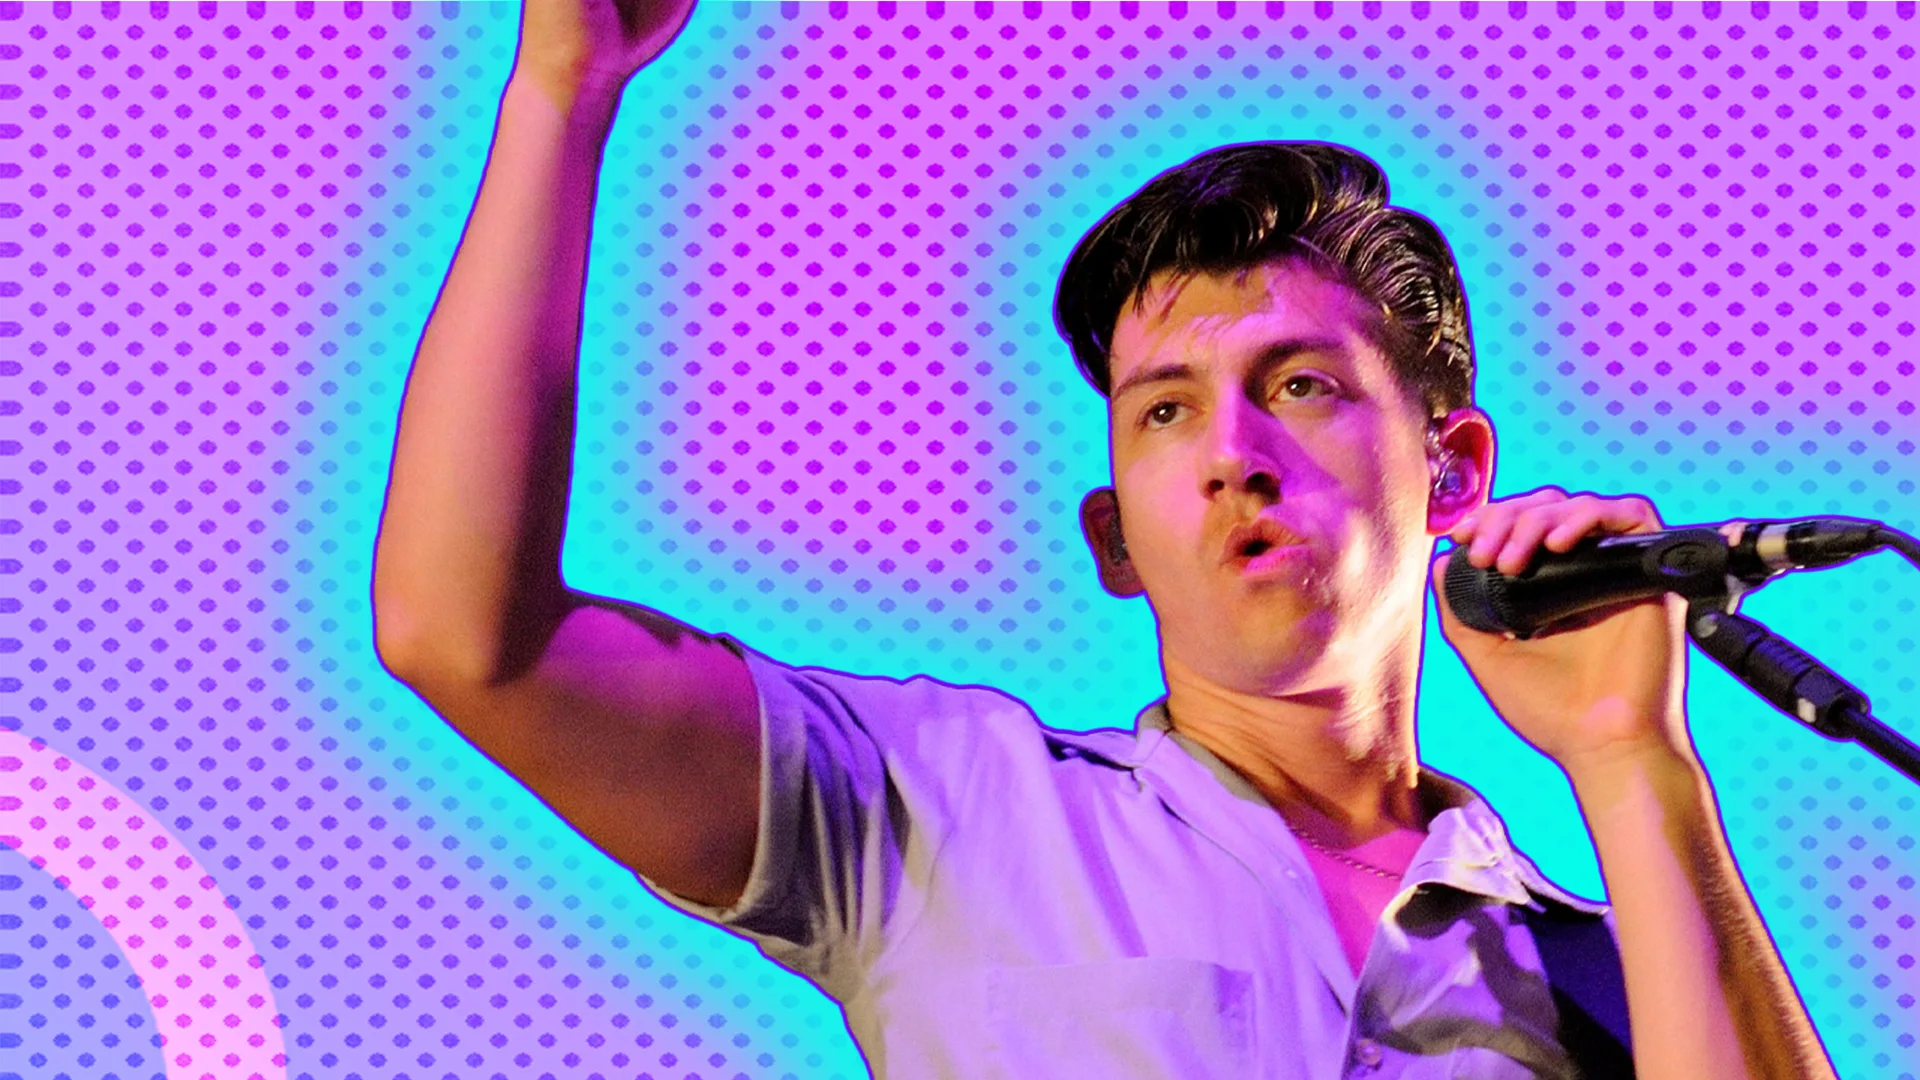 Alex Turner playing a concert with a blue glow around him on a purple background